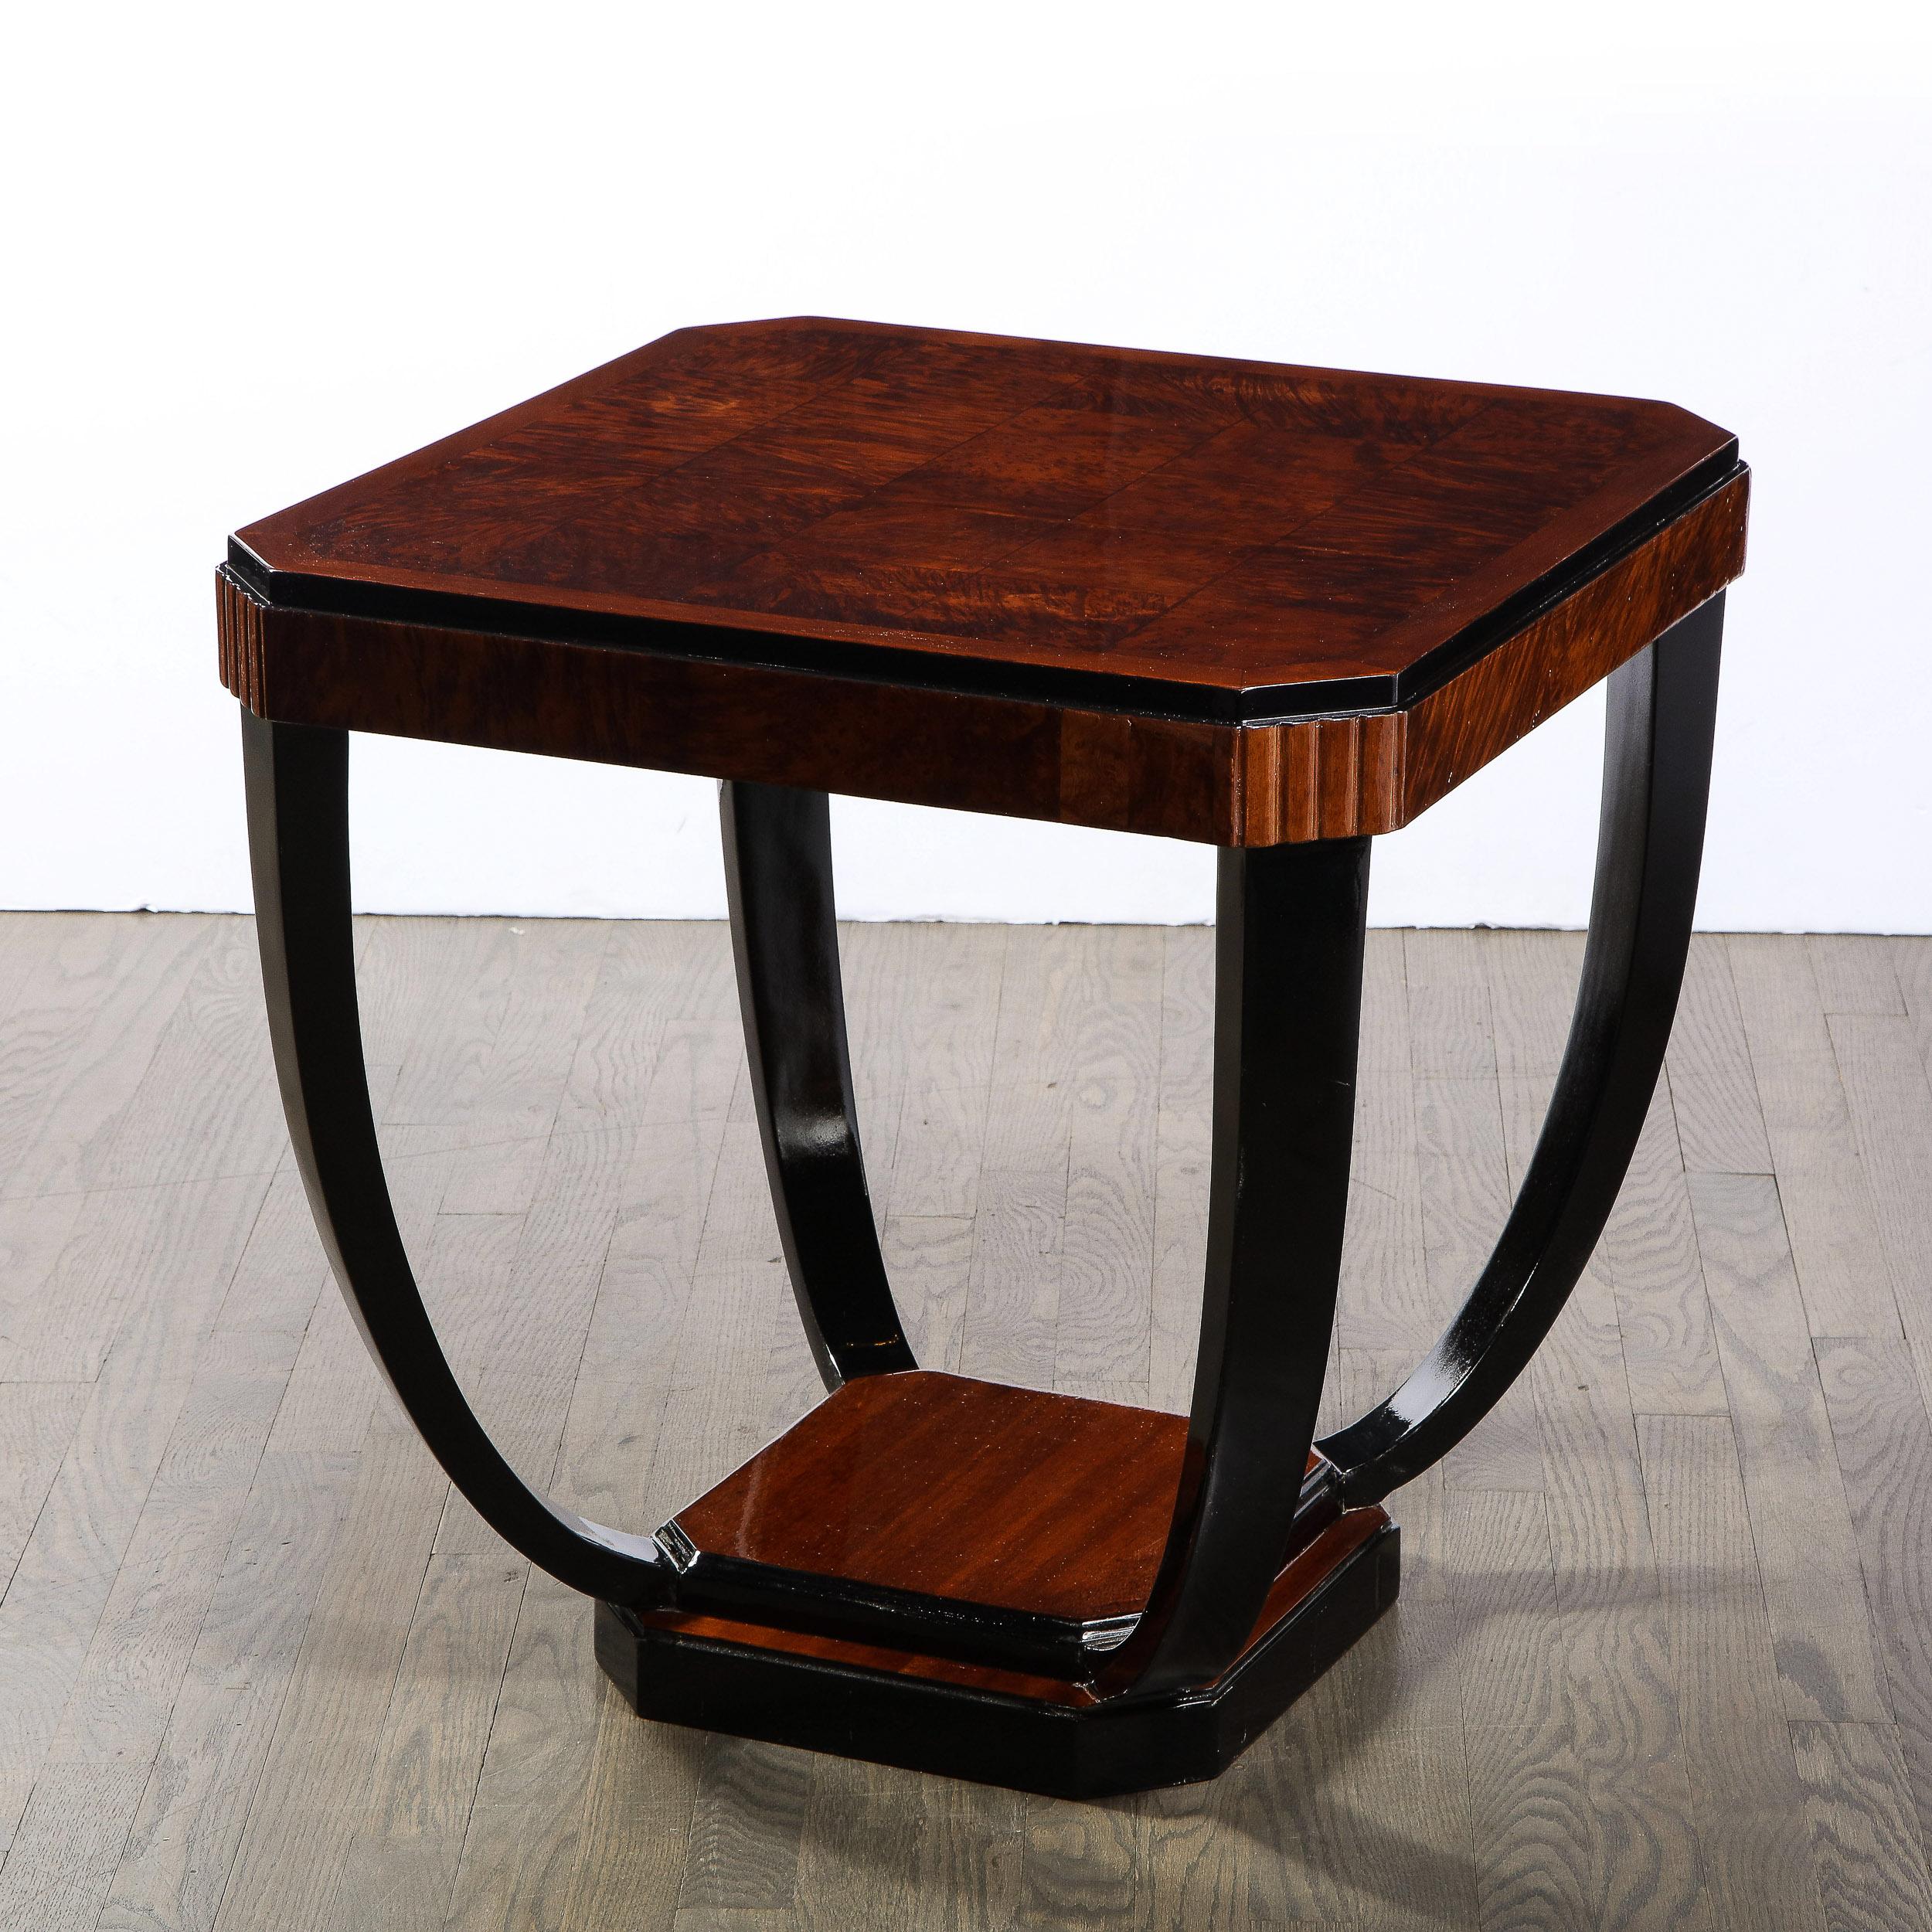 French Art Deco Streamlined Cocktail Table in Bookmatched Burled Walnut & Black Lacquer For Sale